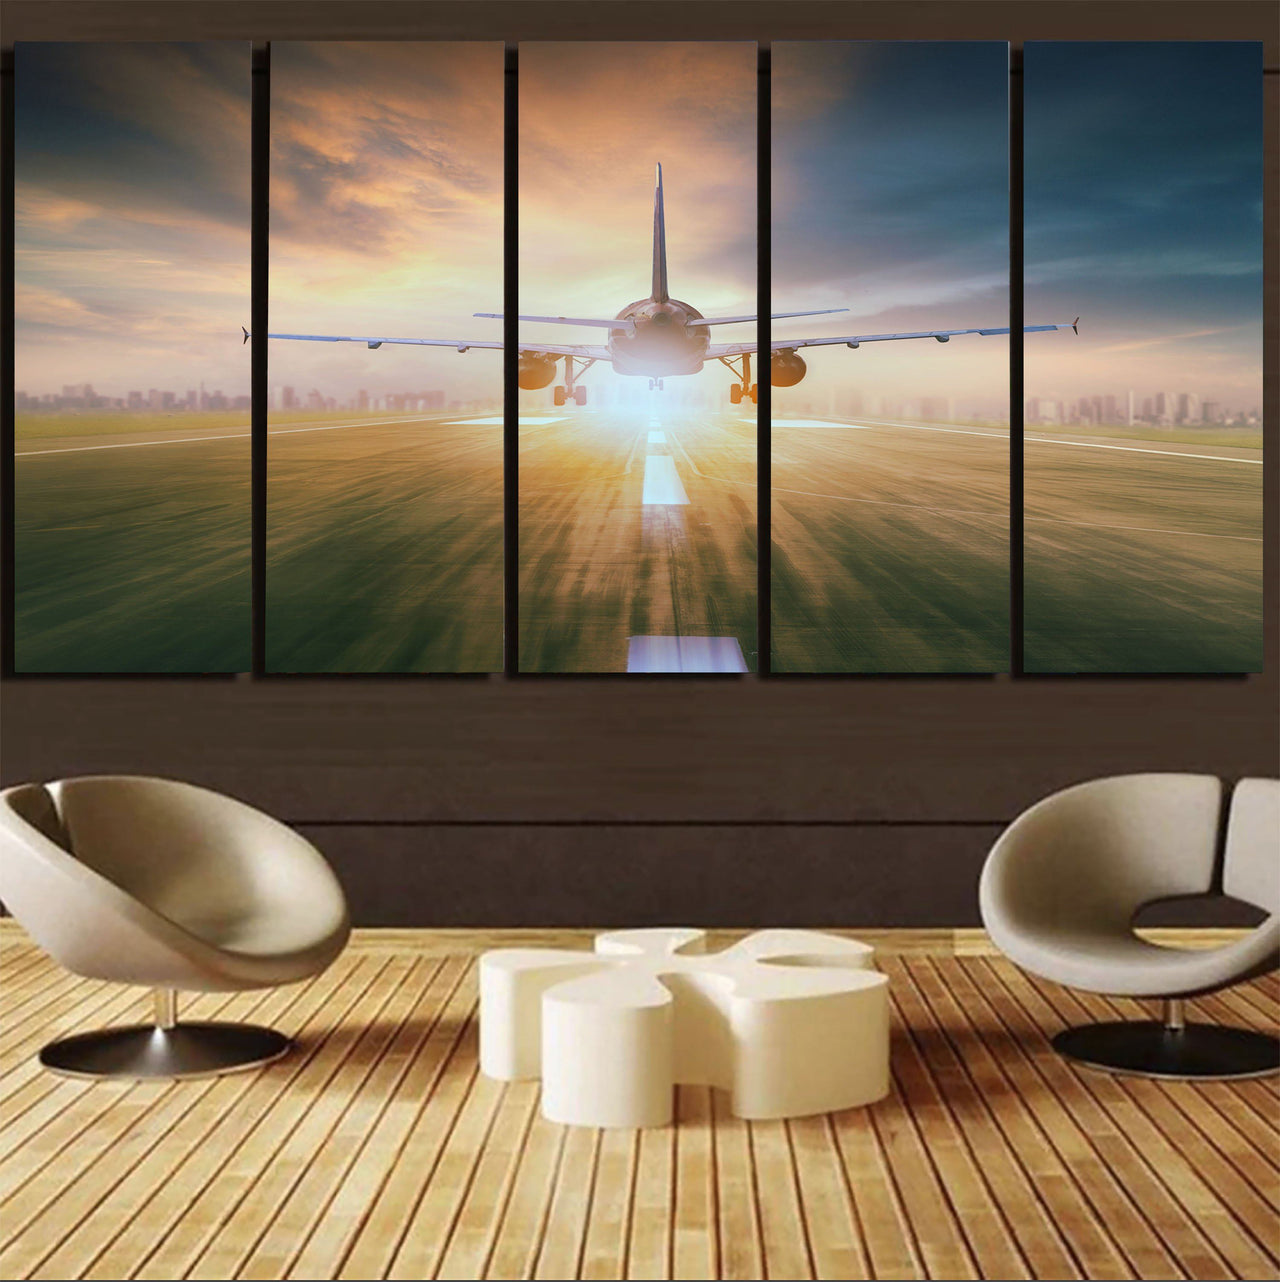 Airplane Flying Over Runway Printed Canvas Prints (5 Pieces) Aviation Shop 